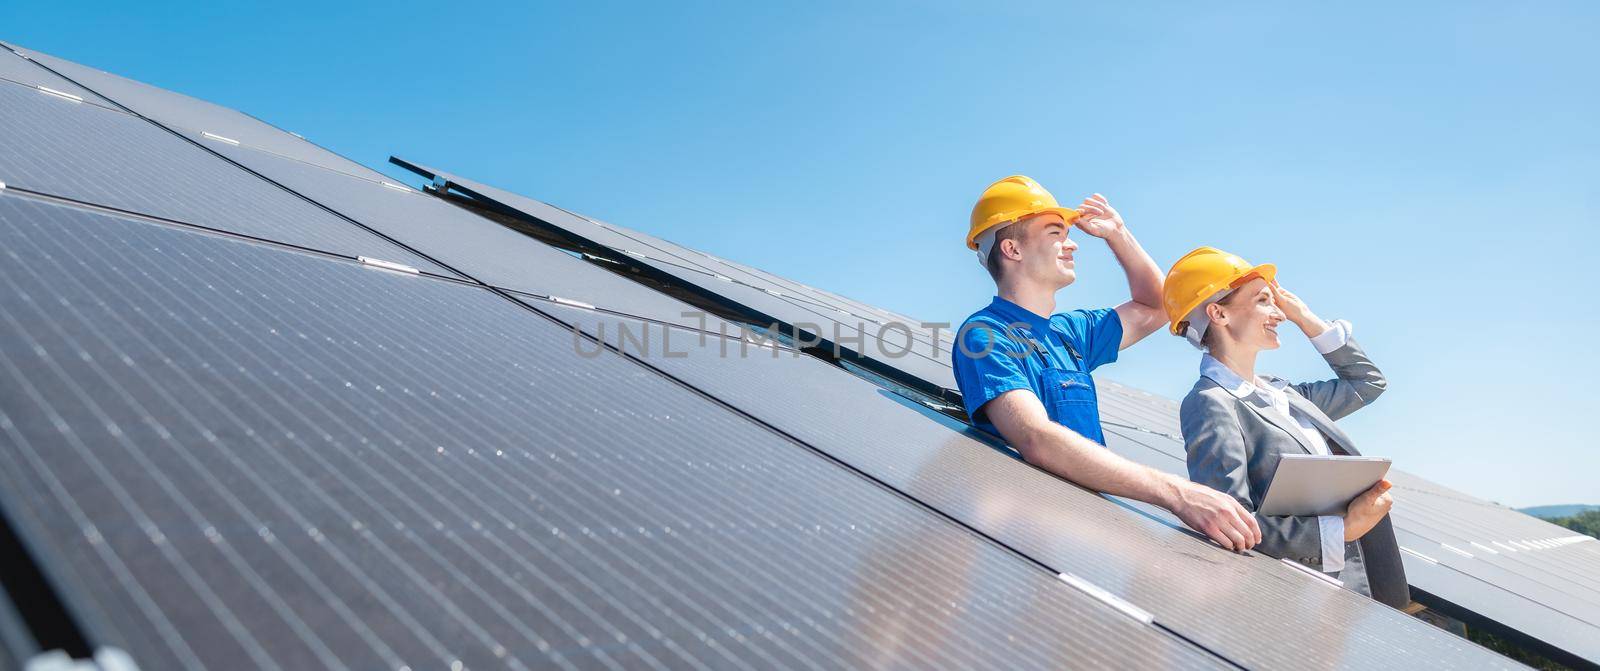 Worker and manager of solar farm looking into the sun by Kzenon